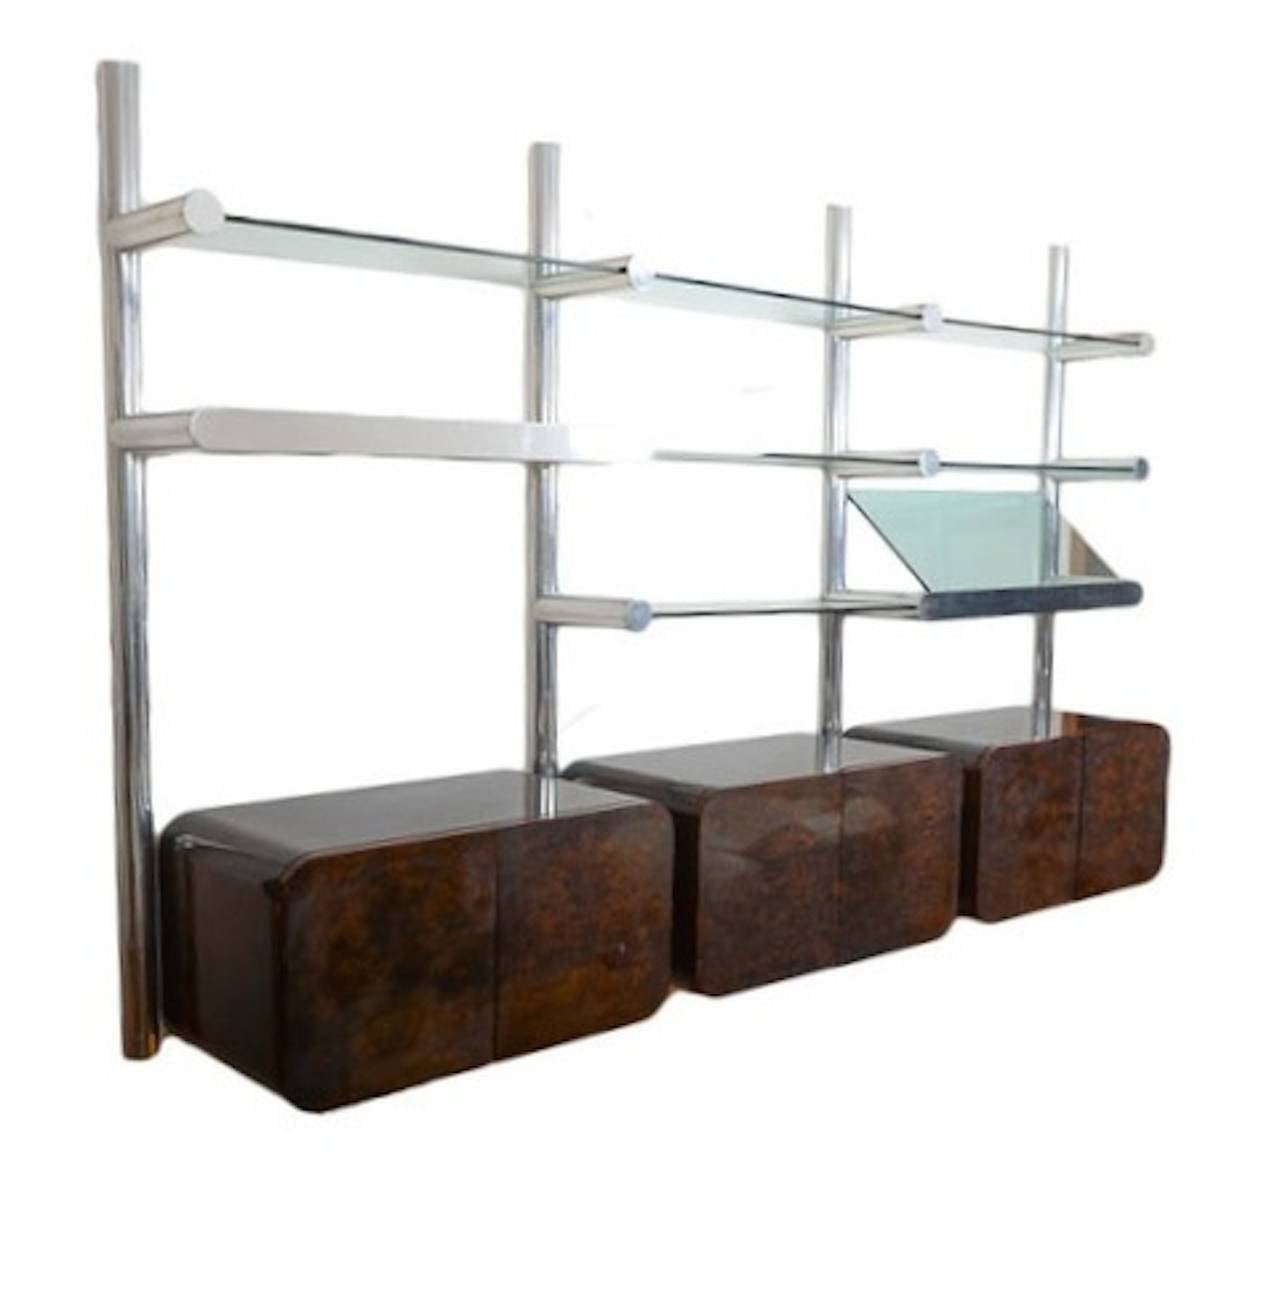 Impossible to find three bay ORBA wall system by Janet Schweitzer for Pace Collection, 1974. The ORBA consists of the wall-mounted shelves which are made of extruded polished aluminum incorporating lighting and heavy glass shelves. Schwietzer's